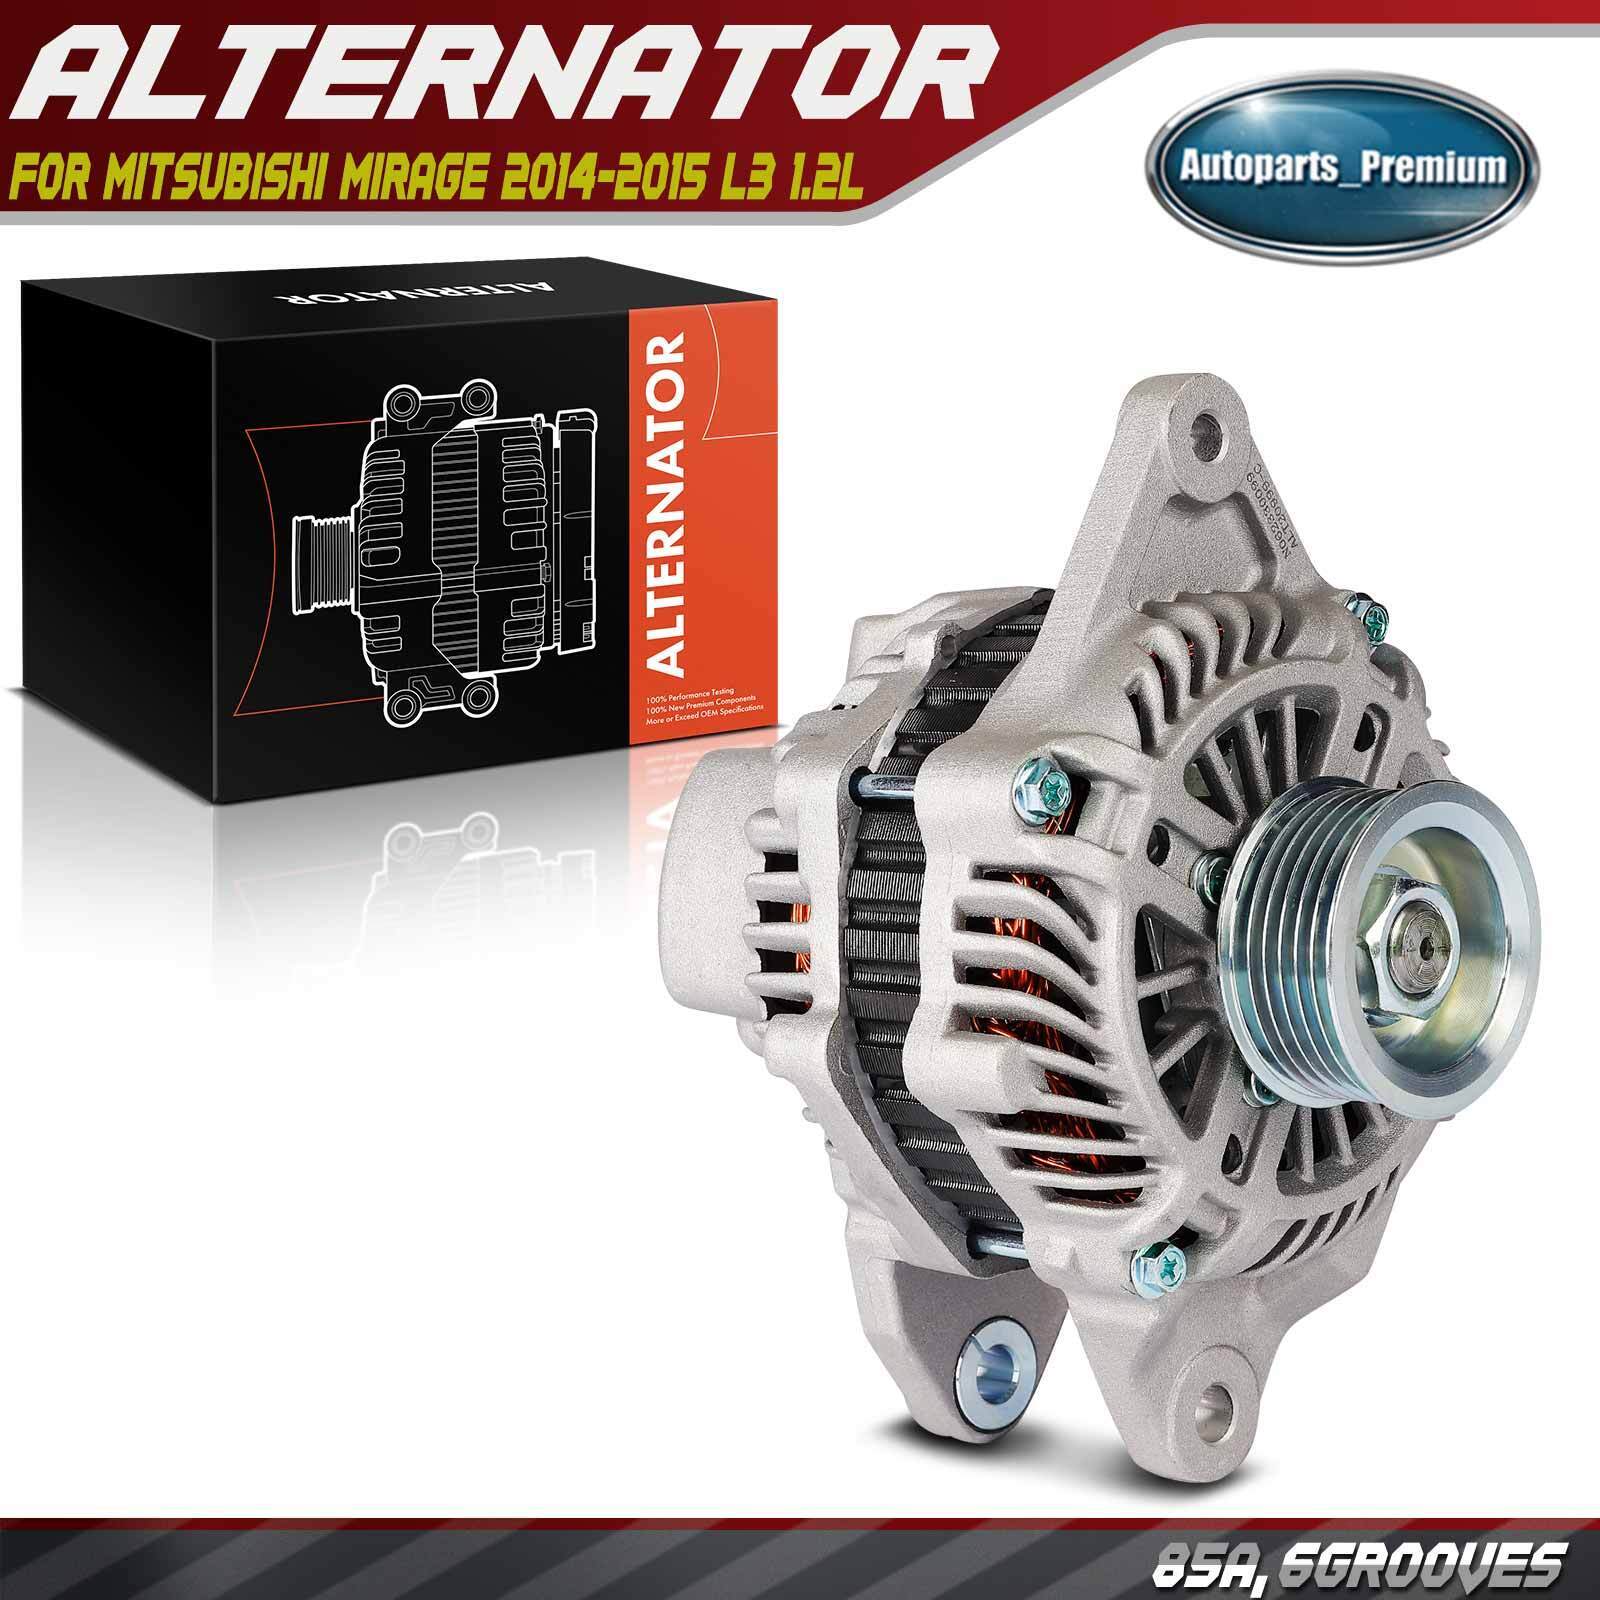 Alternator for Mitsubishi Mirage 2014-2015 L3 1.2L 85A 12V CW 6-Groove Pulley